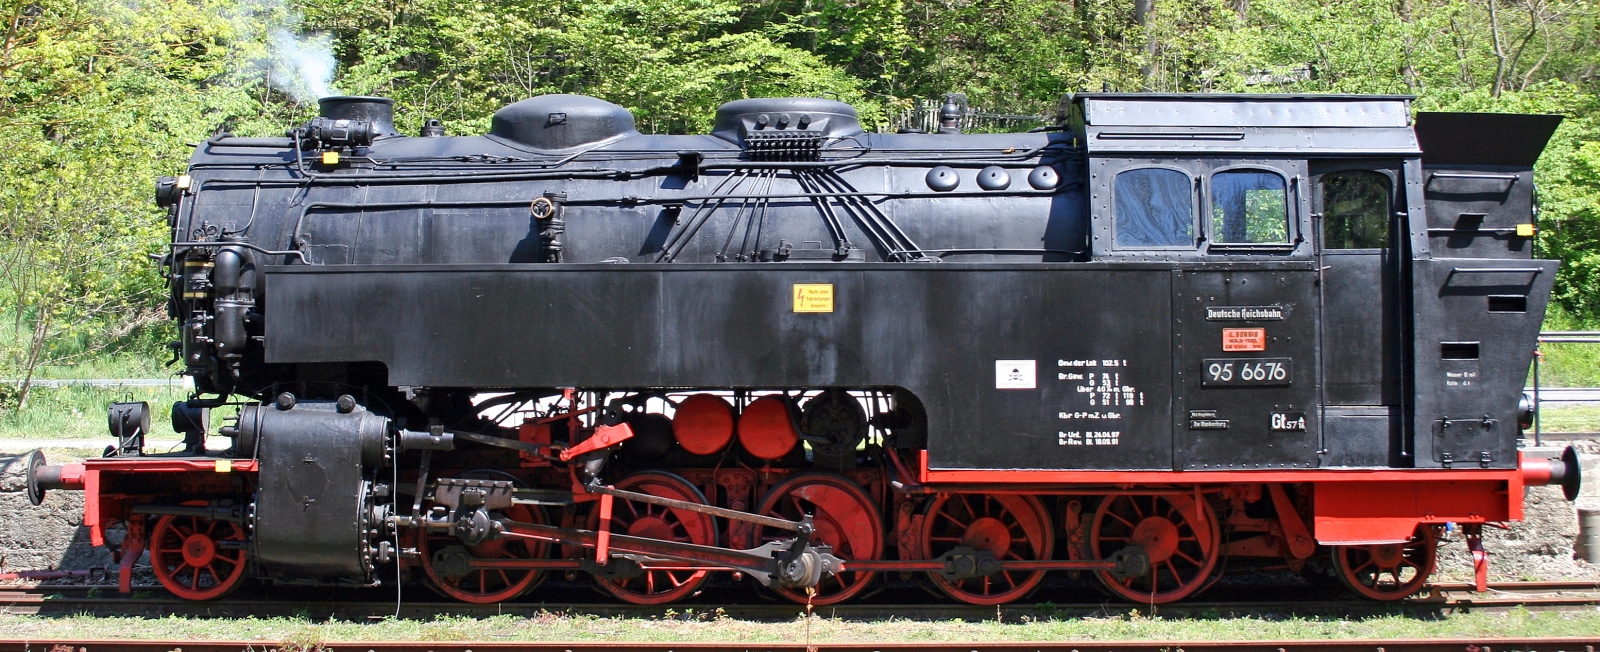 95 6676, the former “Mammut” in April 2011 in Rübeland